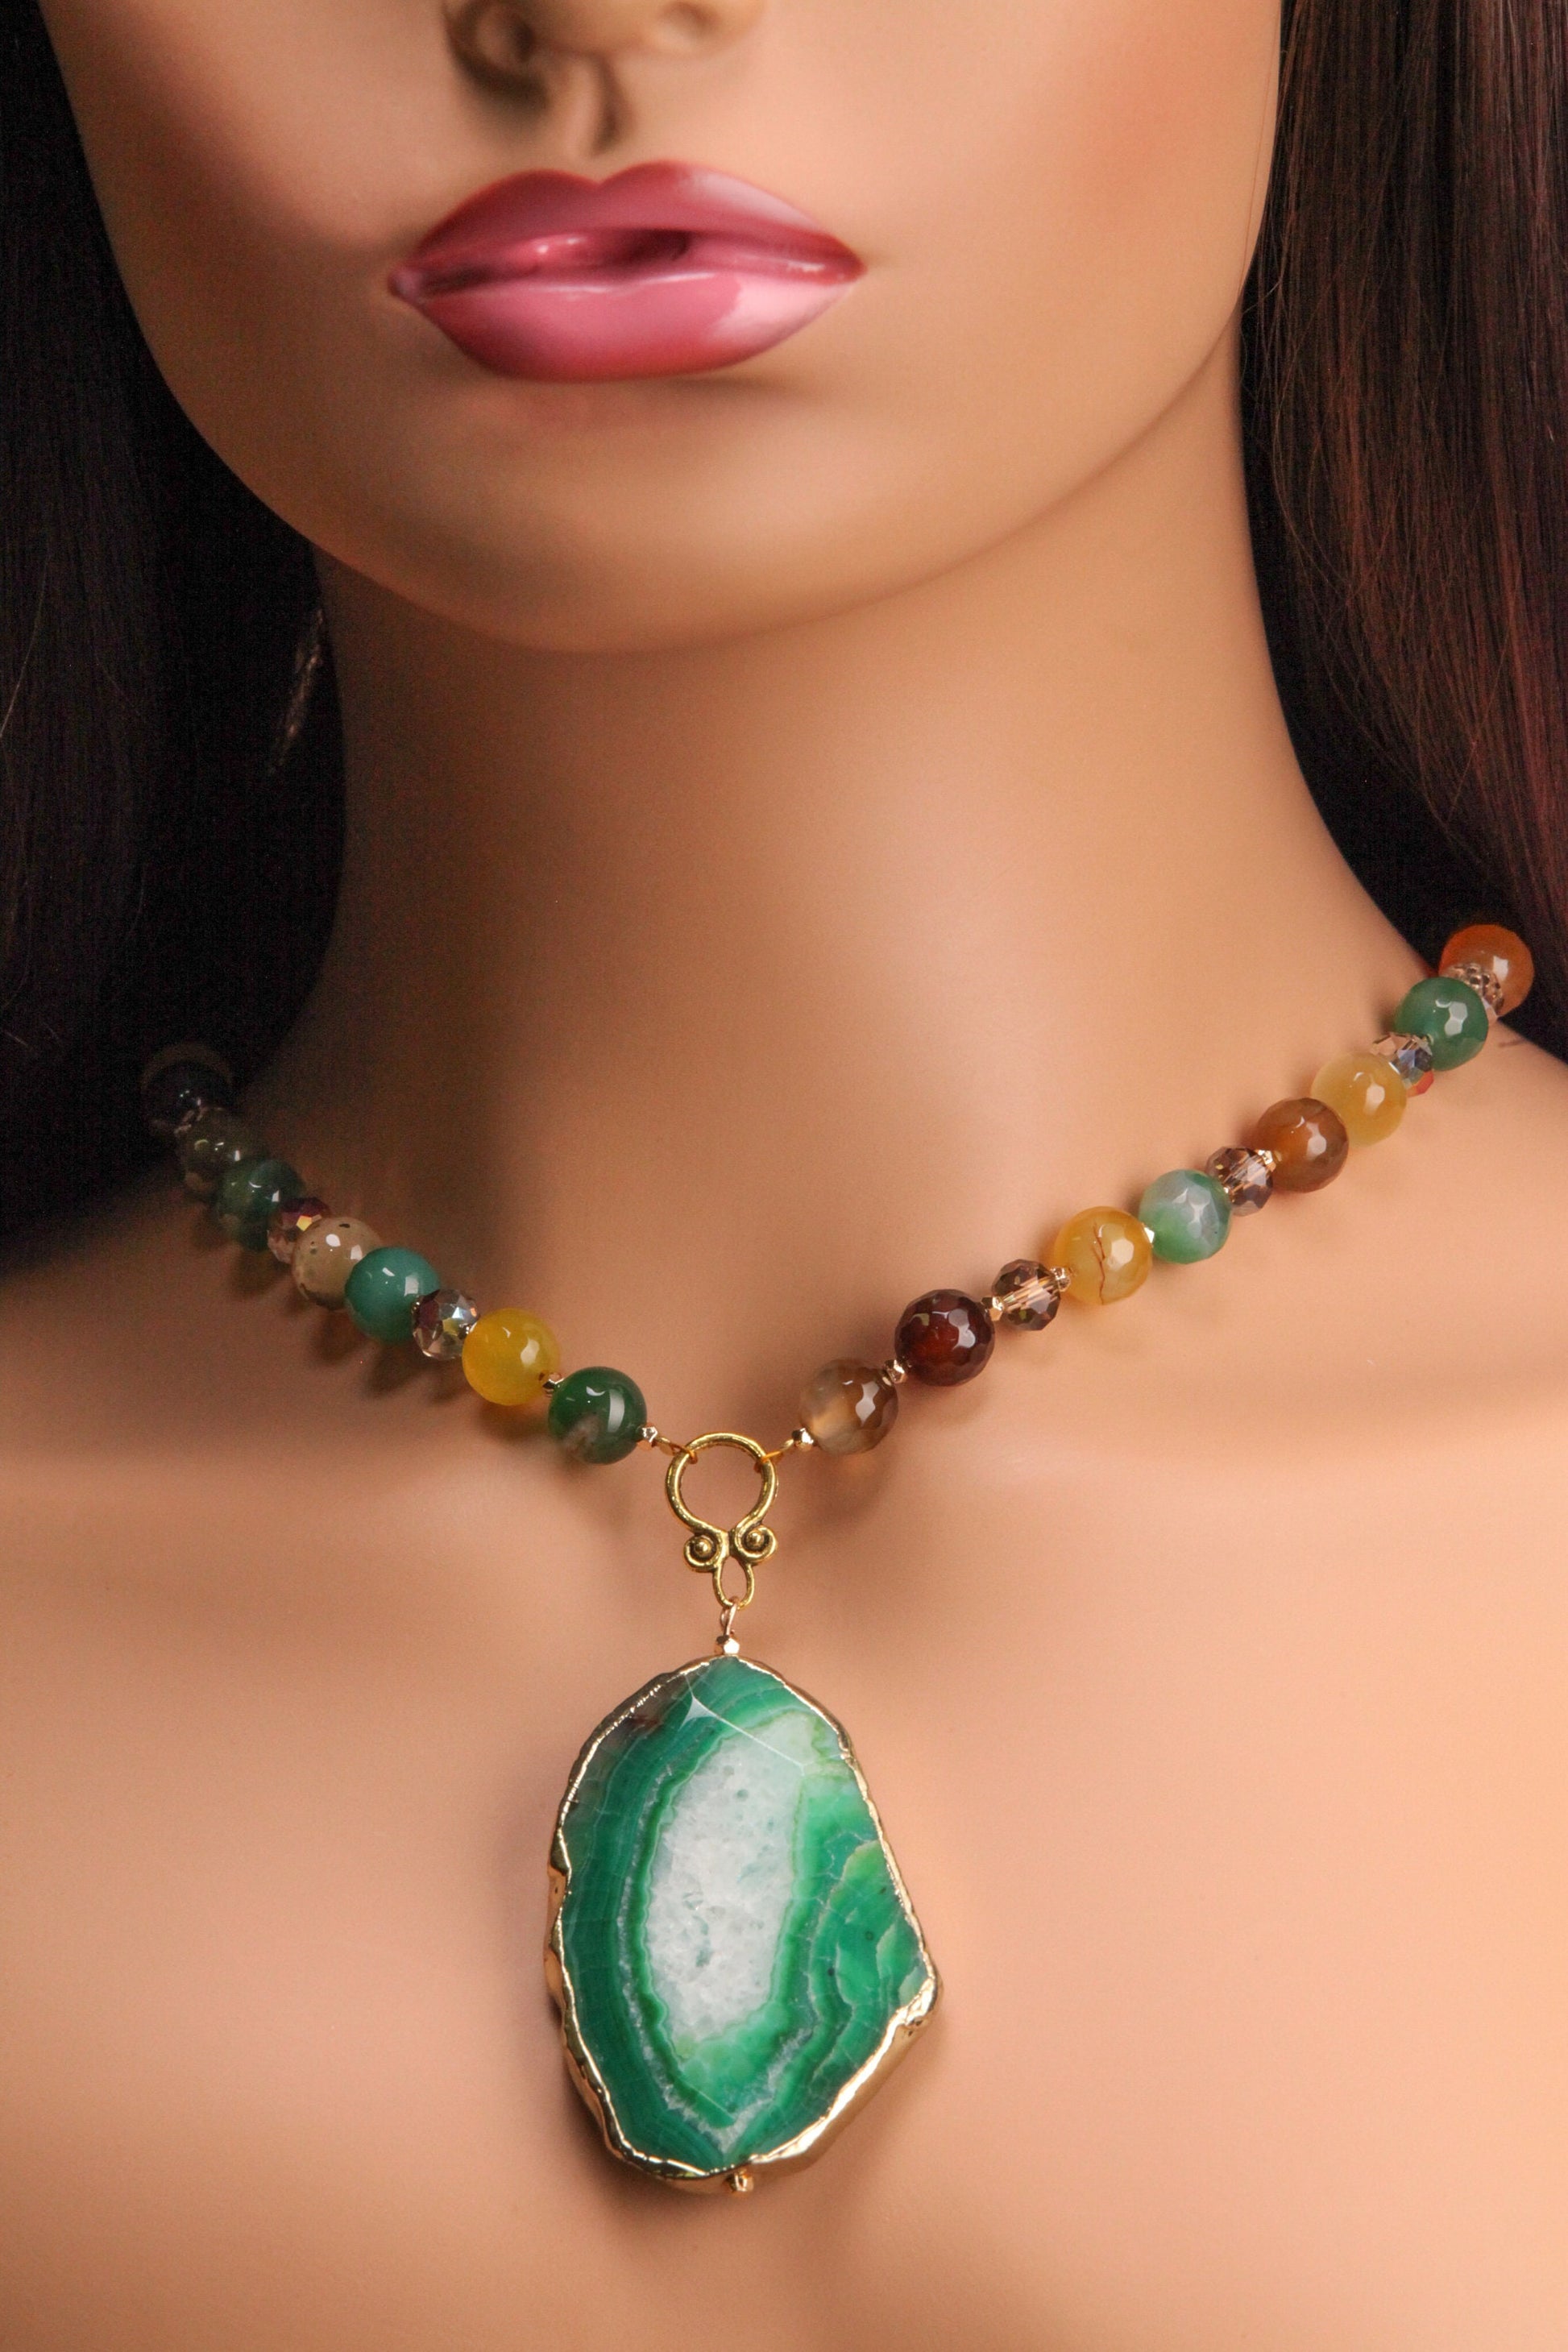 Natural Fire Agate 8mm round and natural green fire agate gold hazel chunk pendant 21" Necklace. Antique gold toggle, Yellow green necklace